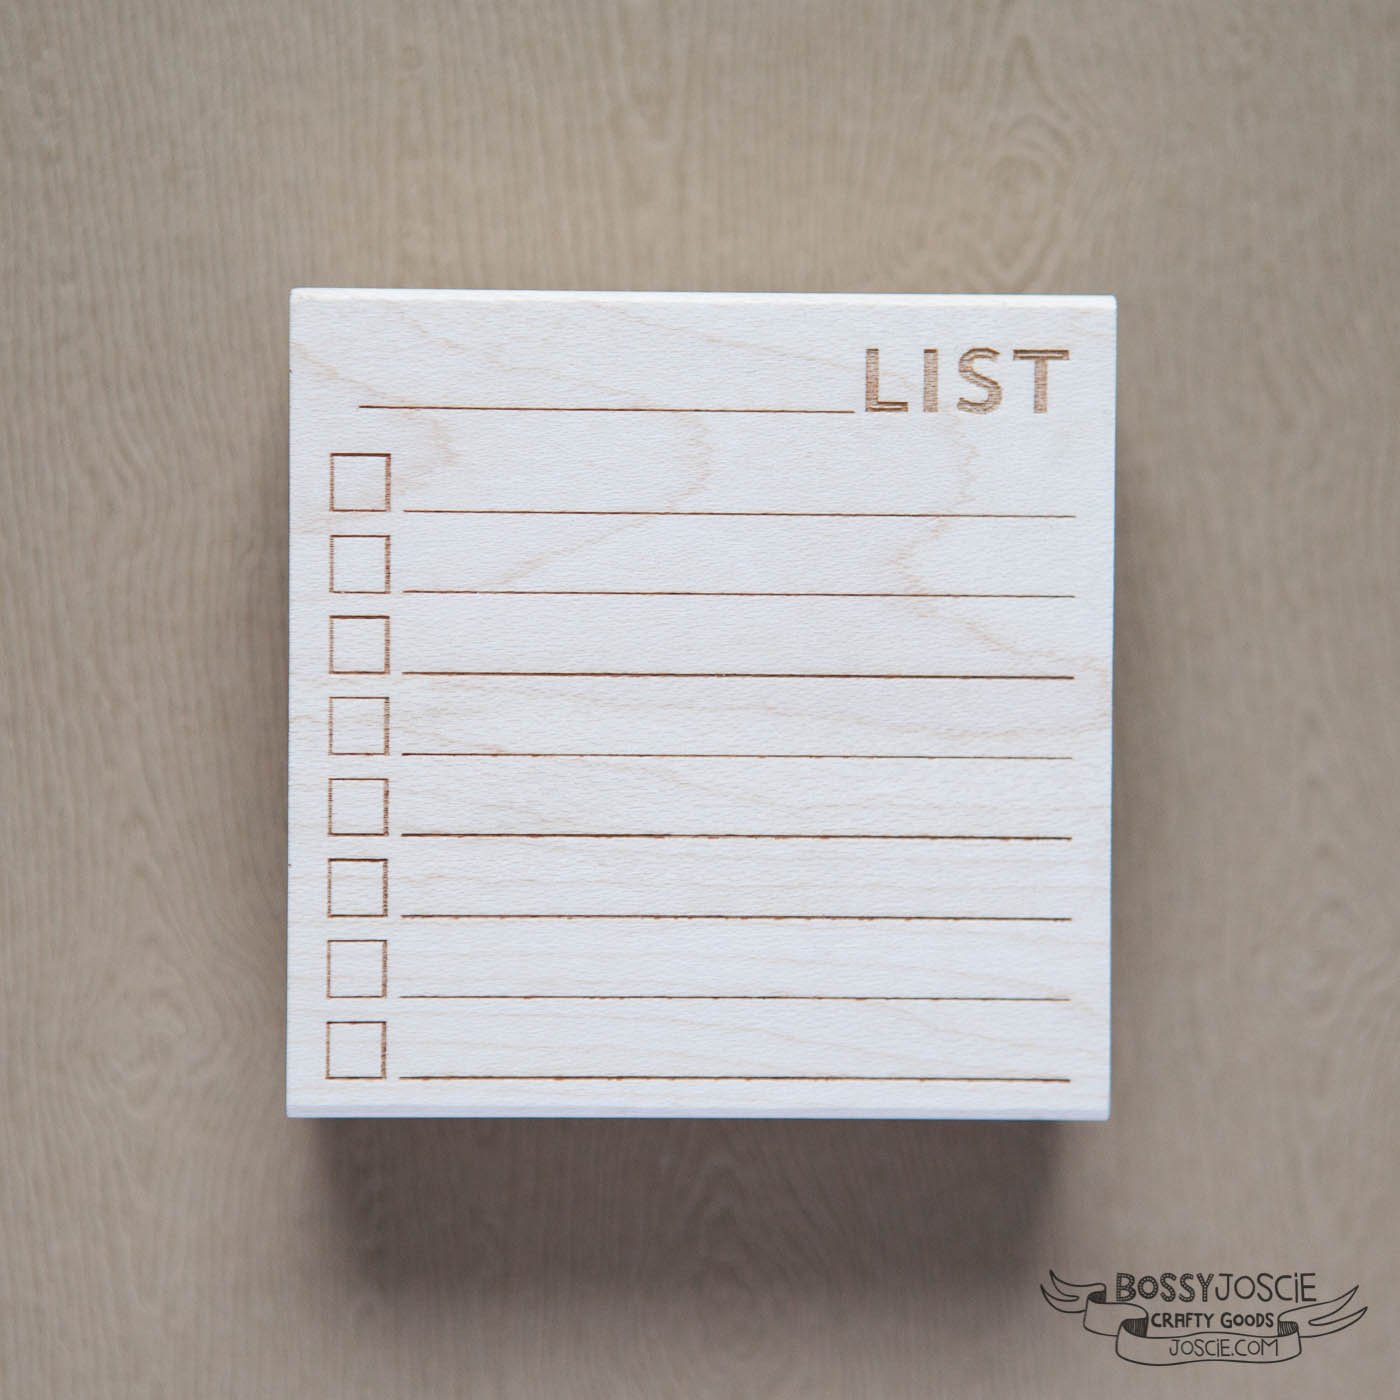 Image of Post it Note sized Blank List Stamp